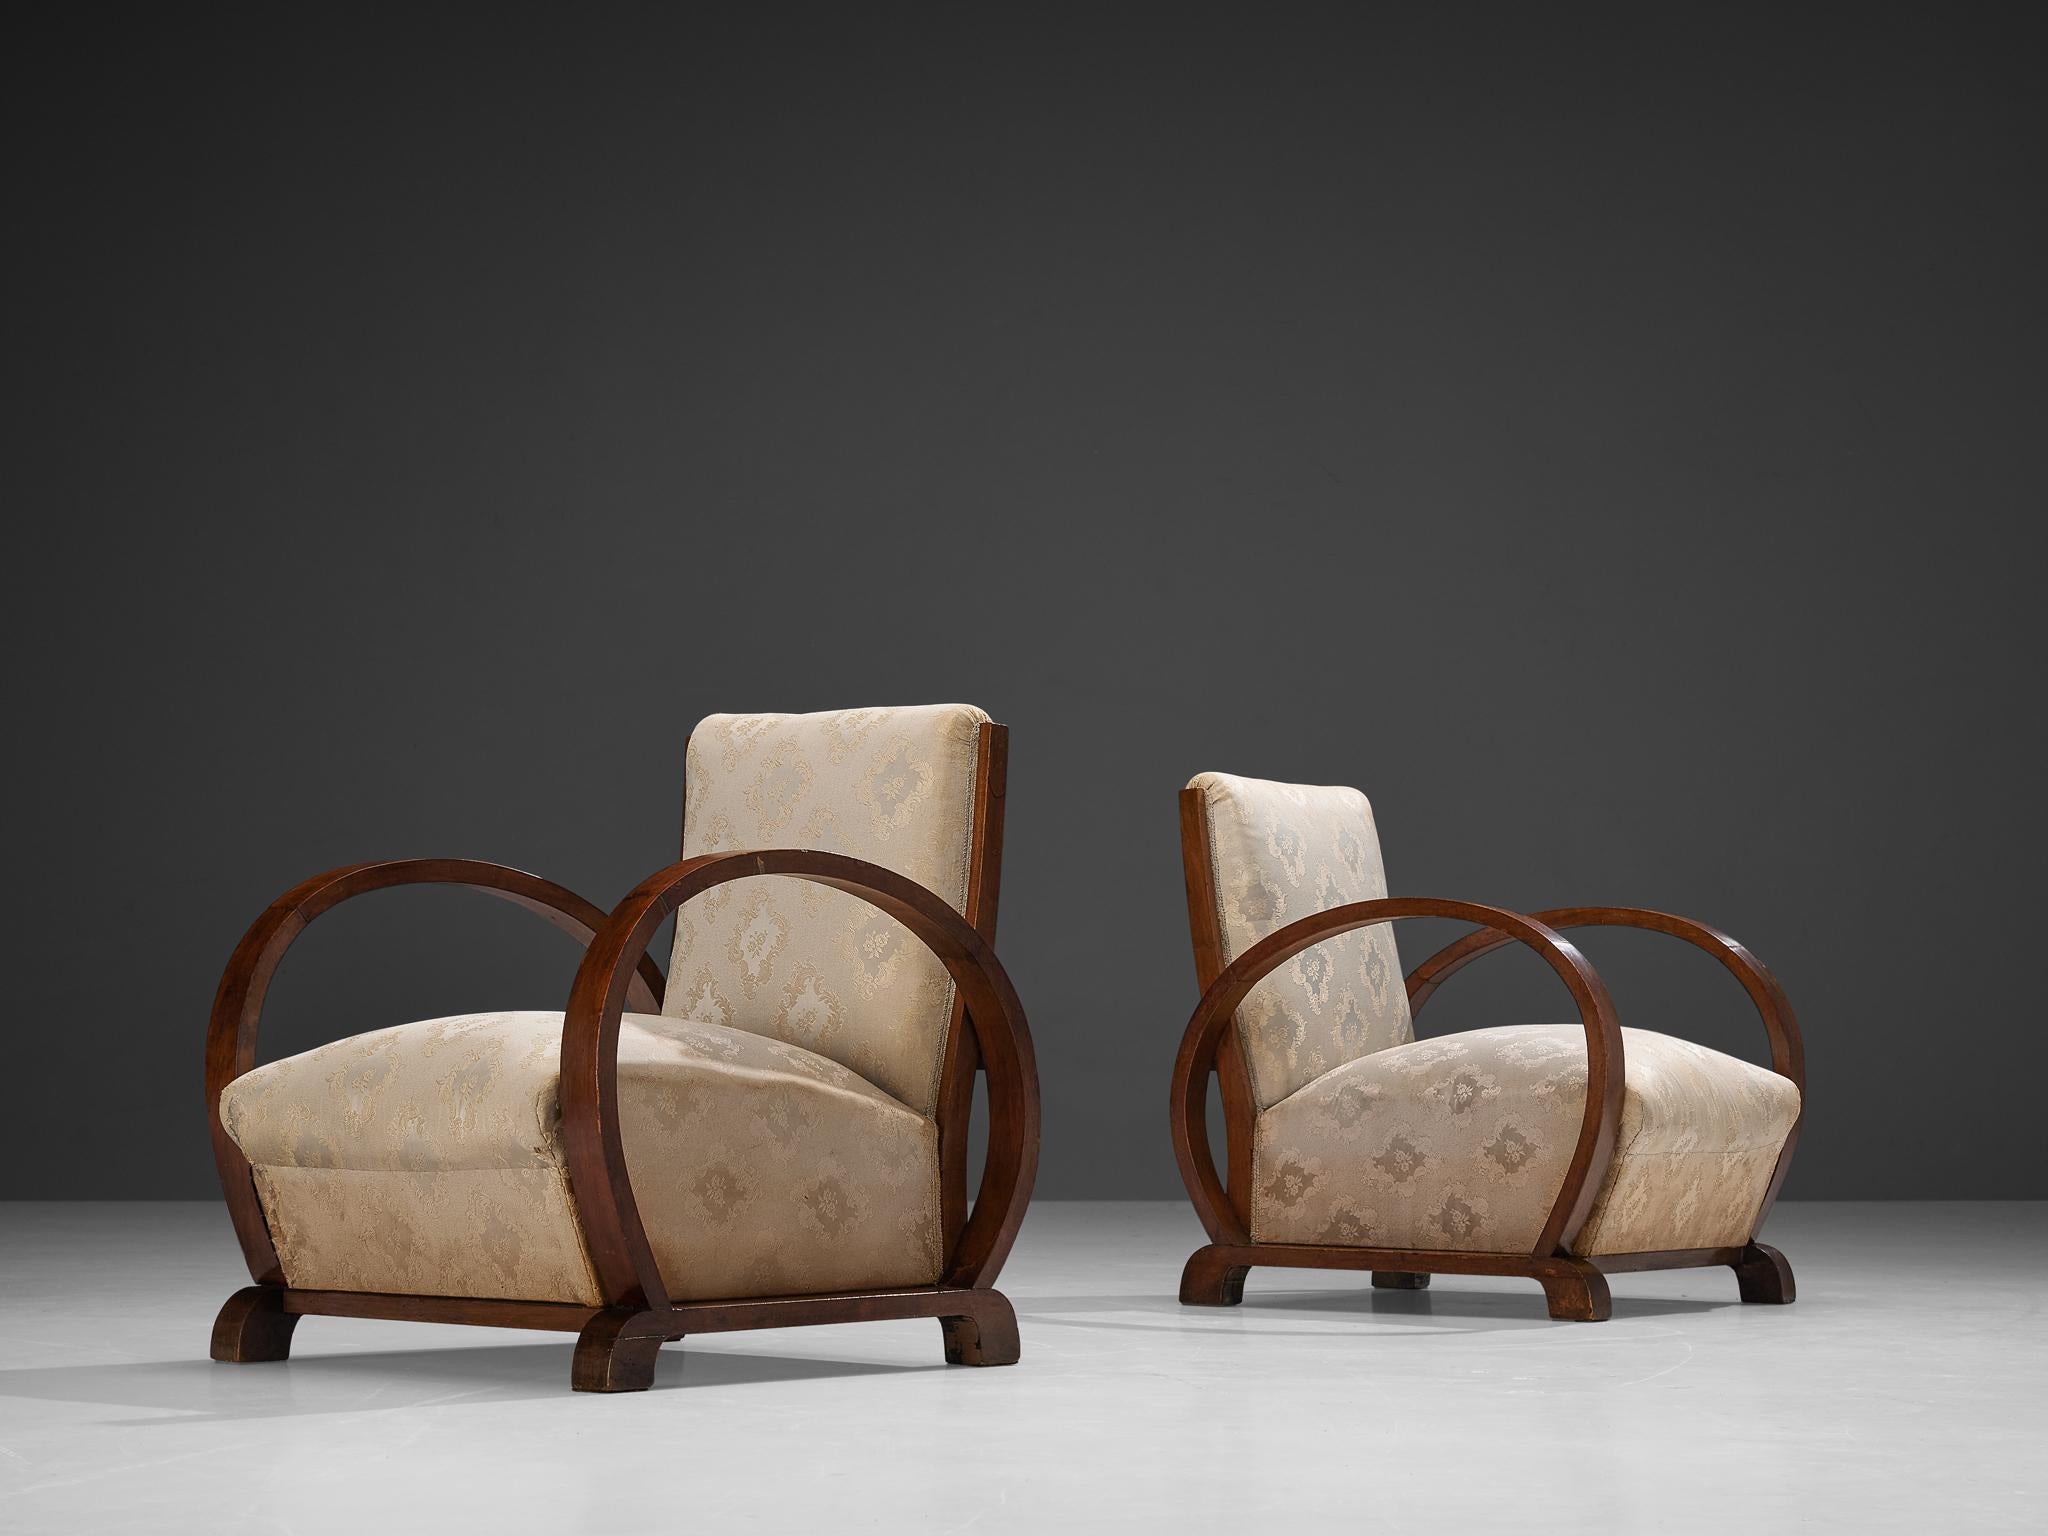 Pair of lounge chairs, walnut, fabric, Italy, 1930s

These beautifully designed armchairs are created in one of the most influential periods for the arts namely the Art Deco Movement. The armrests are curved in a hemispherical shape which is typical